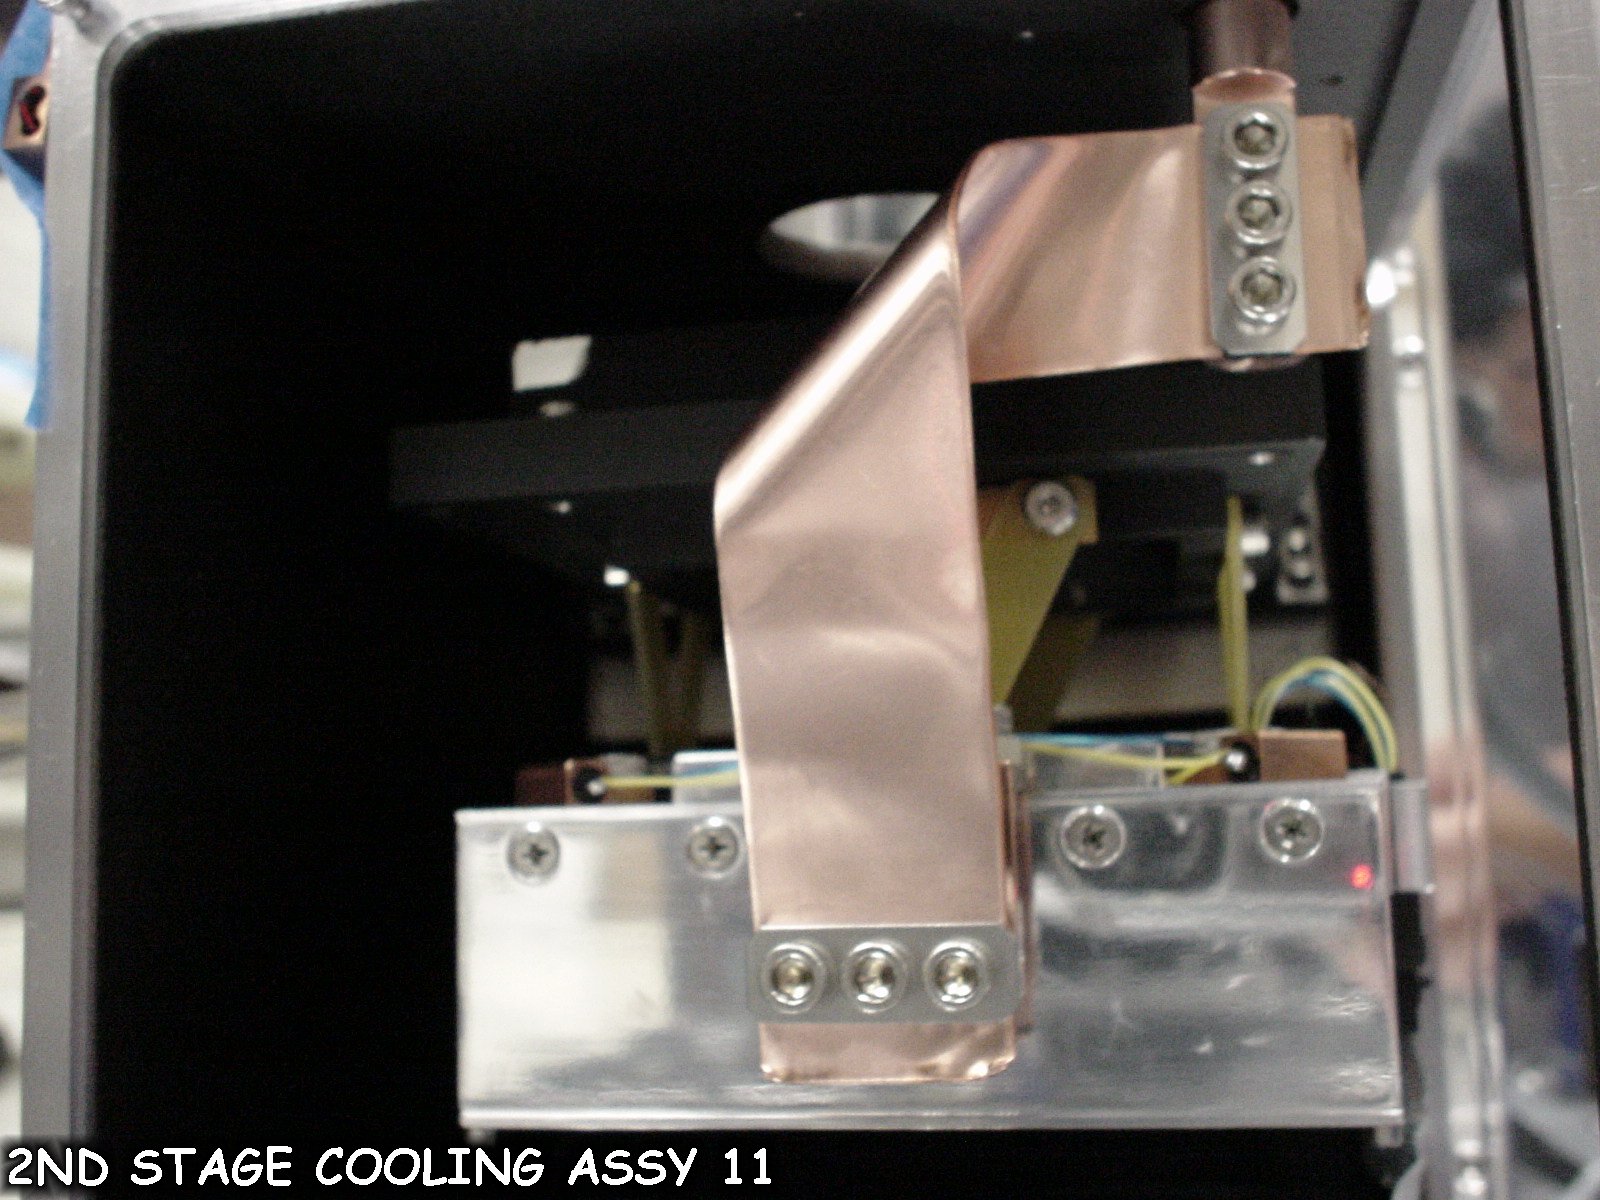 2nd Stage Cooling Assy 11